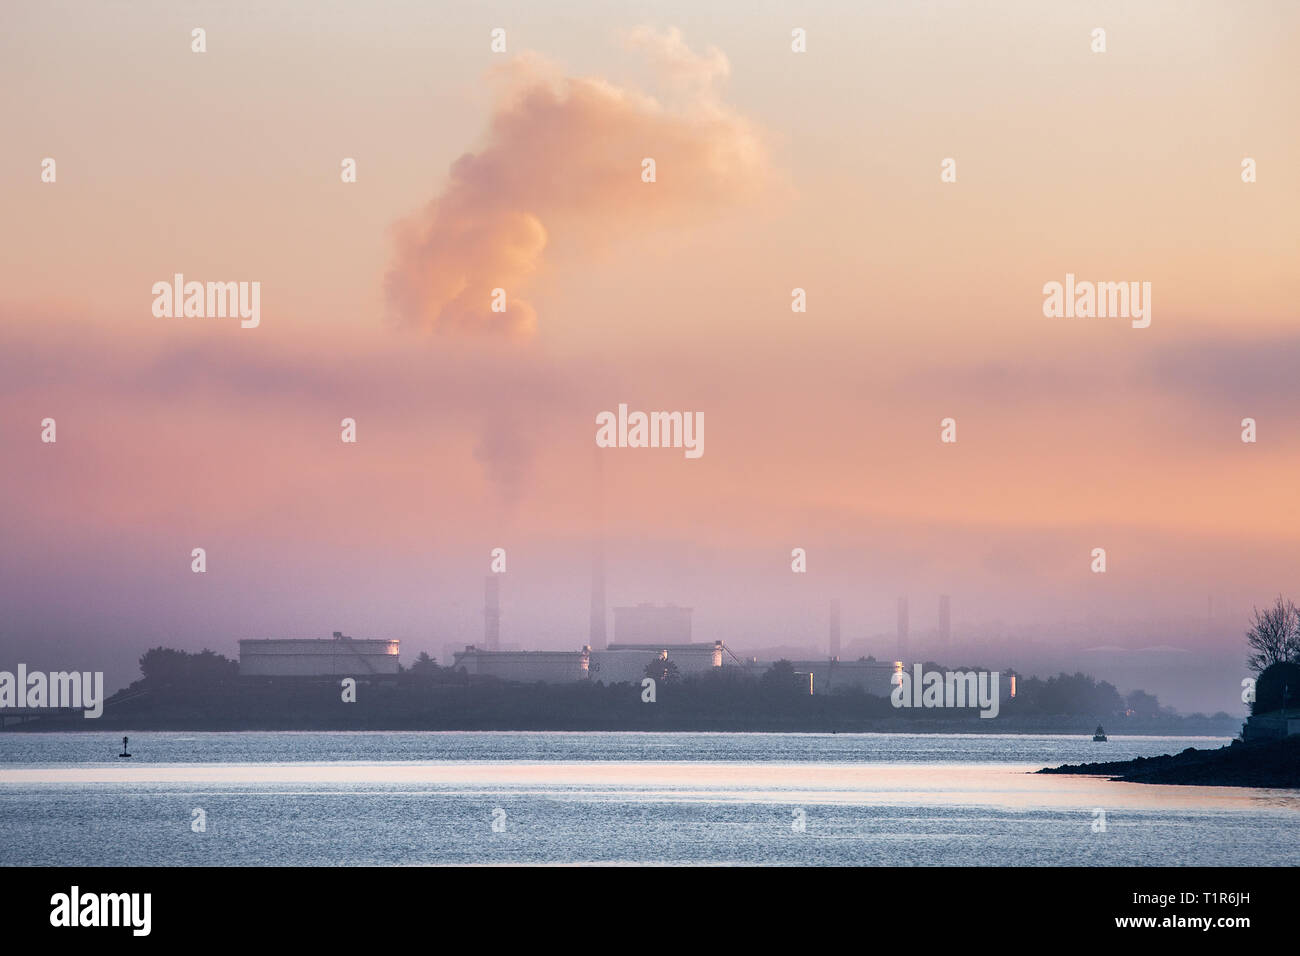 Whitegate, Cork, Ireland. 28th March, 2019. A clear night gave way to some early morning fog around the oil refinery at Whitegate, Co. Cork, Ireland. Credit: David Creedon/Alamy Live News Stock Photo